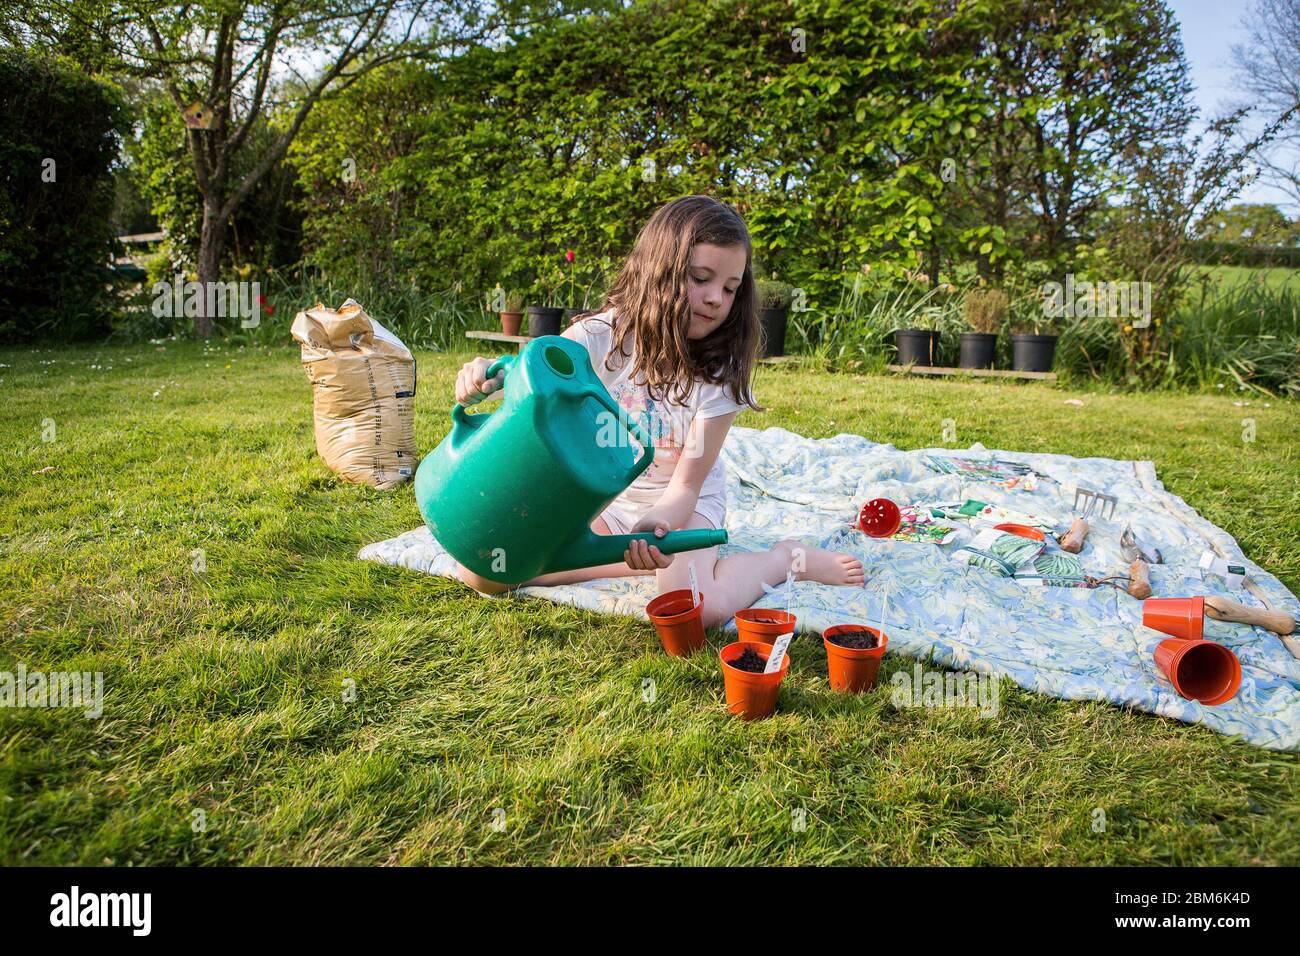 Little girl planting seeds and gardening in a garden, Kent, UK Stock Photo